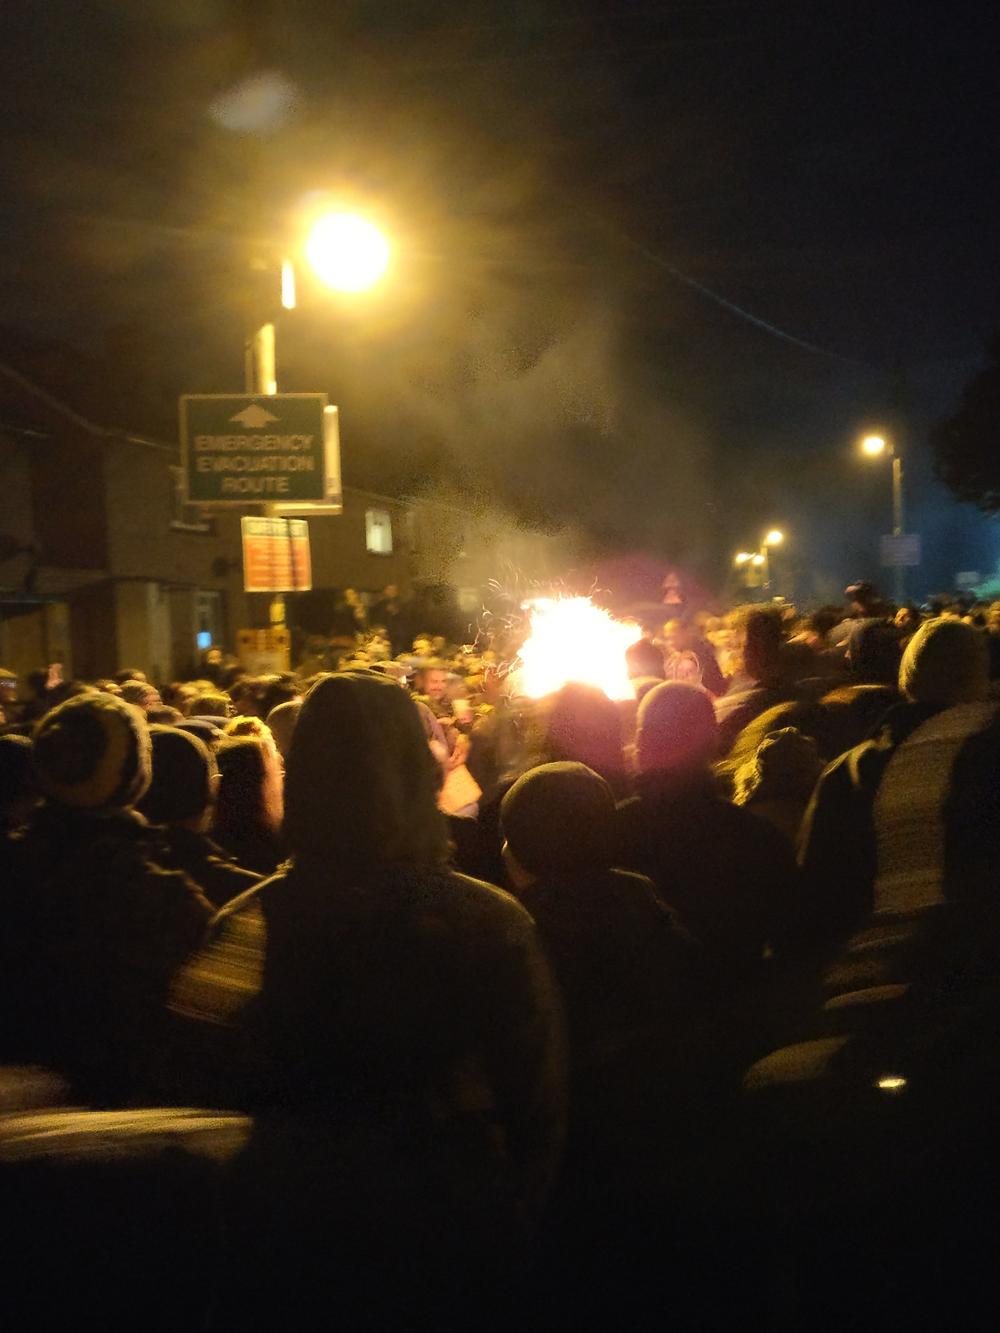 A crowd gathers around a burning barrel in Ottery St Mary